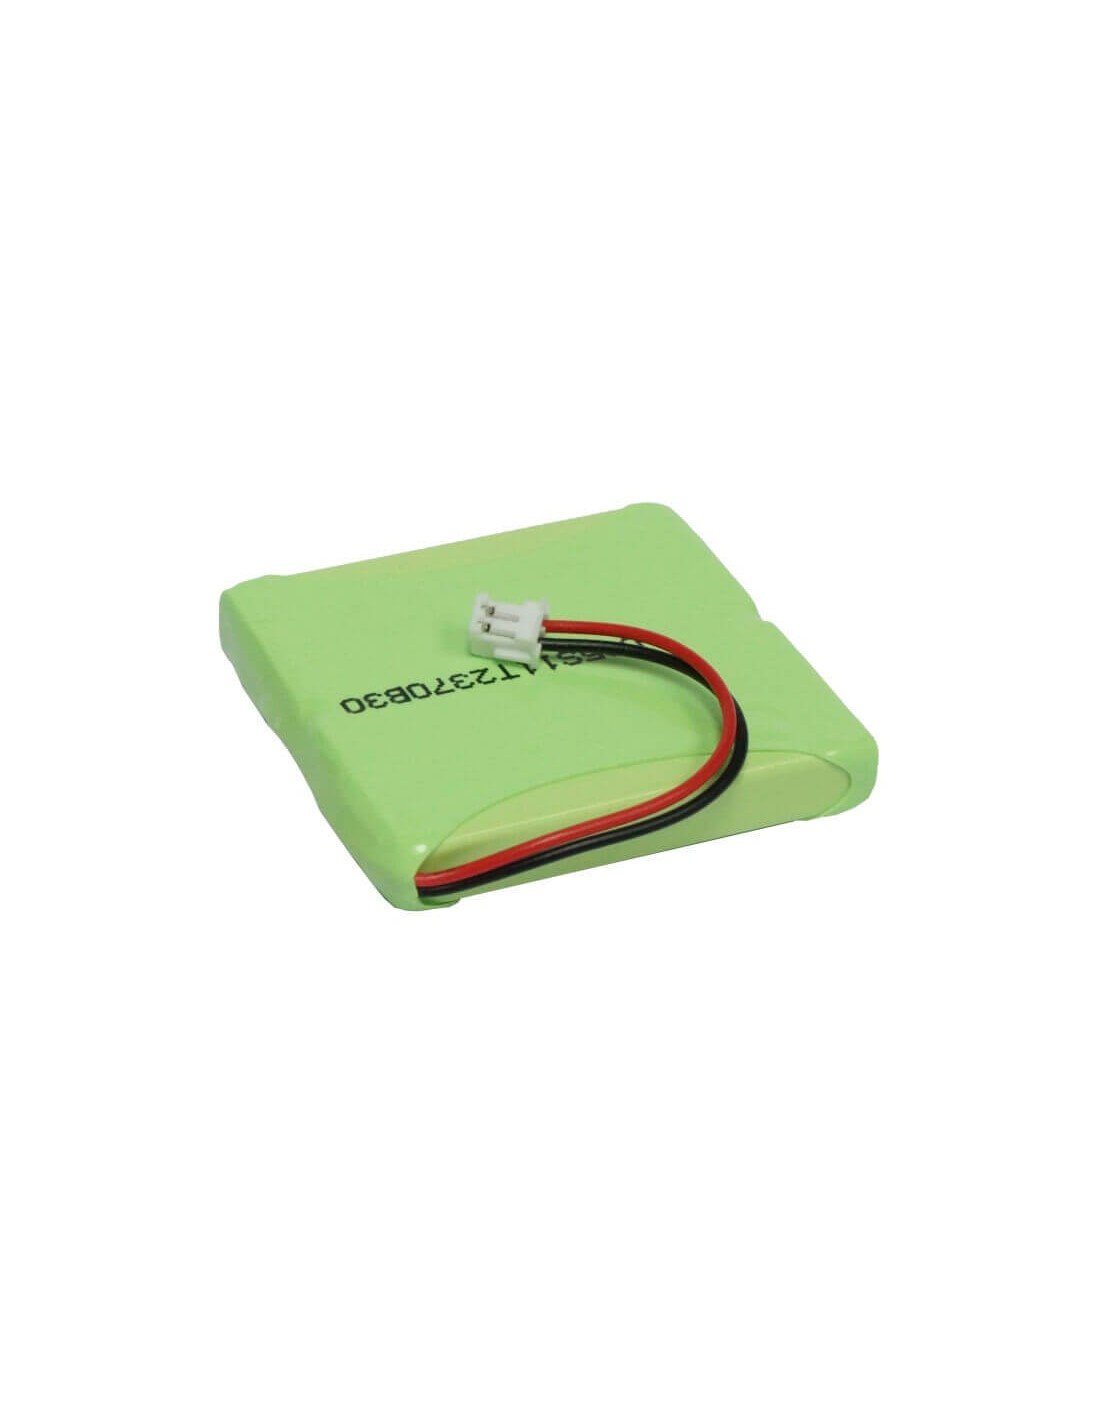 Battery for Doro, Th50, Th55, Th60, Th65 2.4V, 600mAh - 1.44Wh